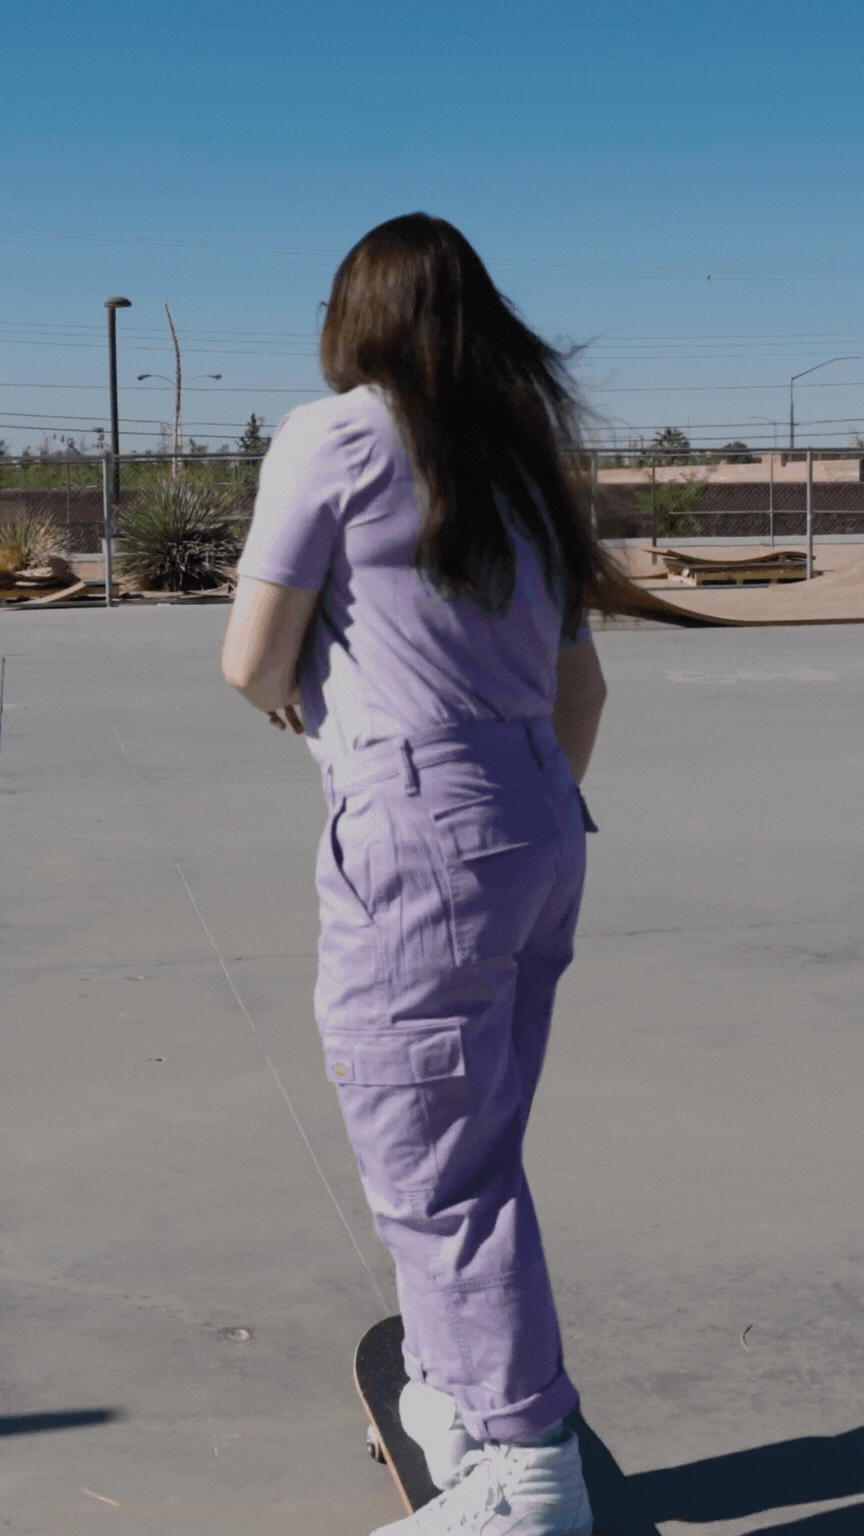 Girl in a purple outfit skateboarding away.